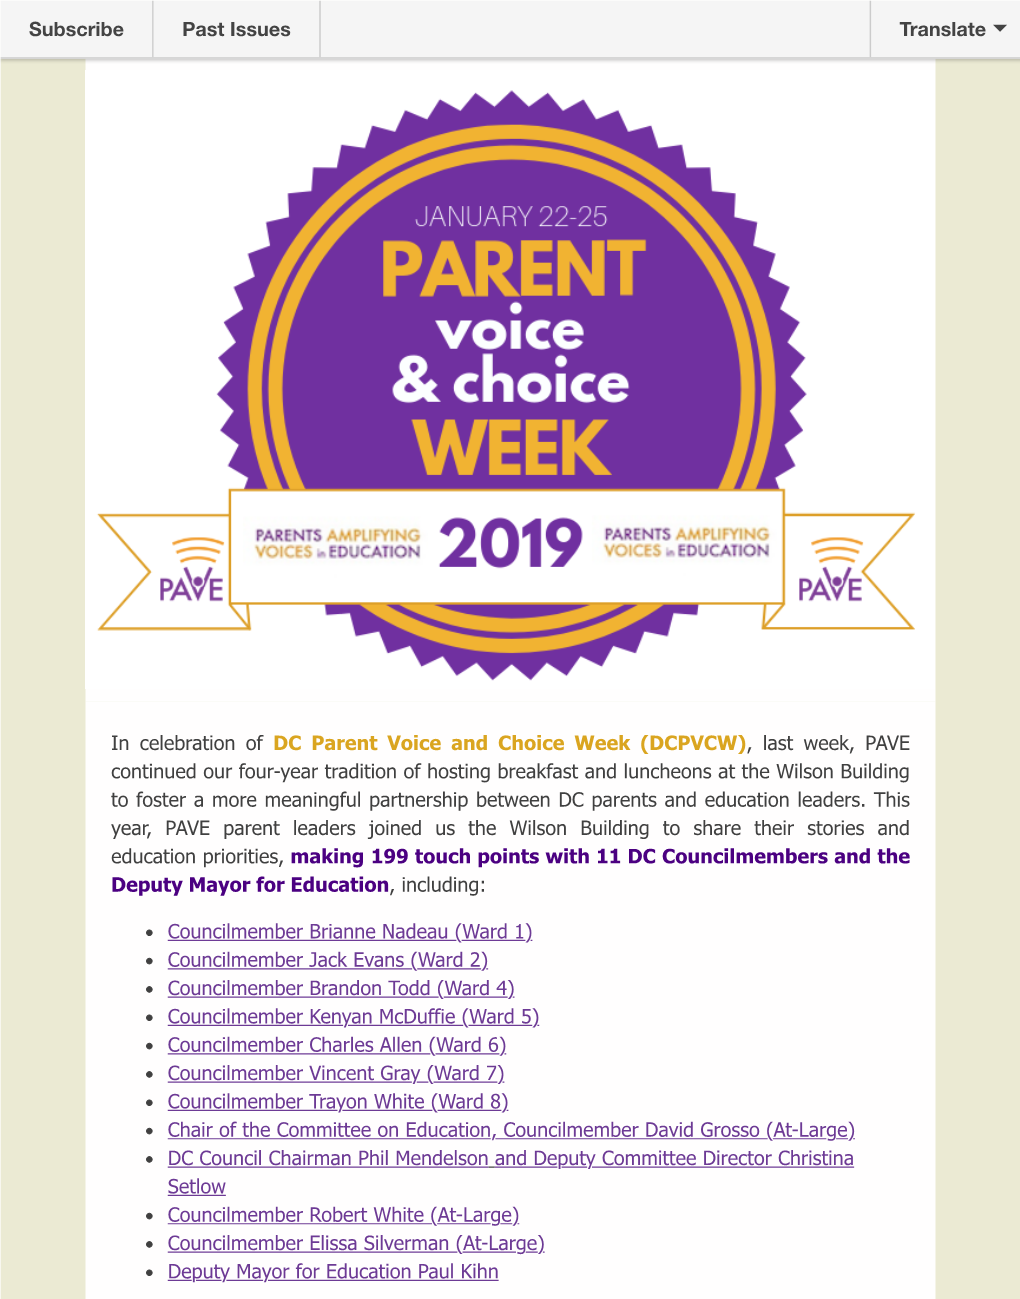 In Celebration of DC Parent Voice and Choice Week (DCPVCW), Last Week